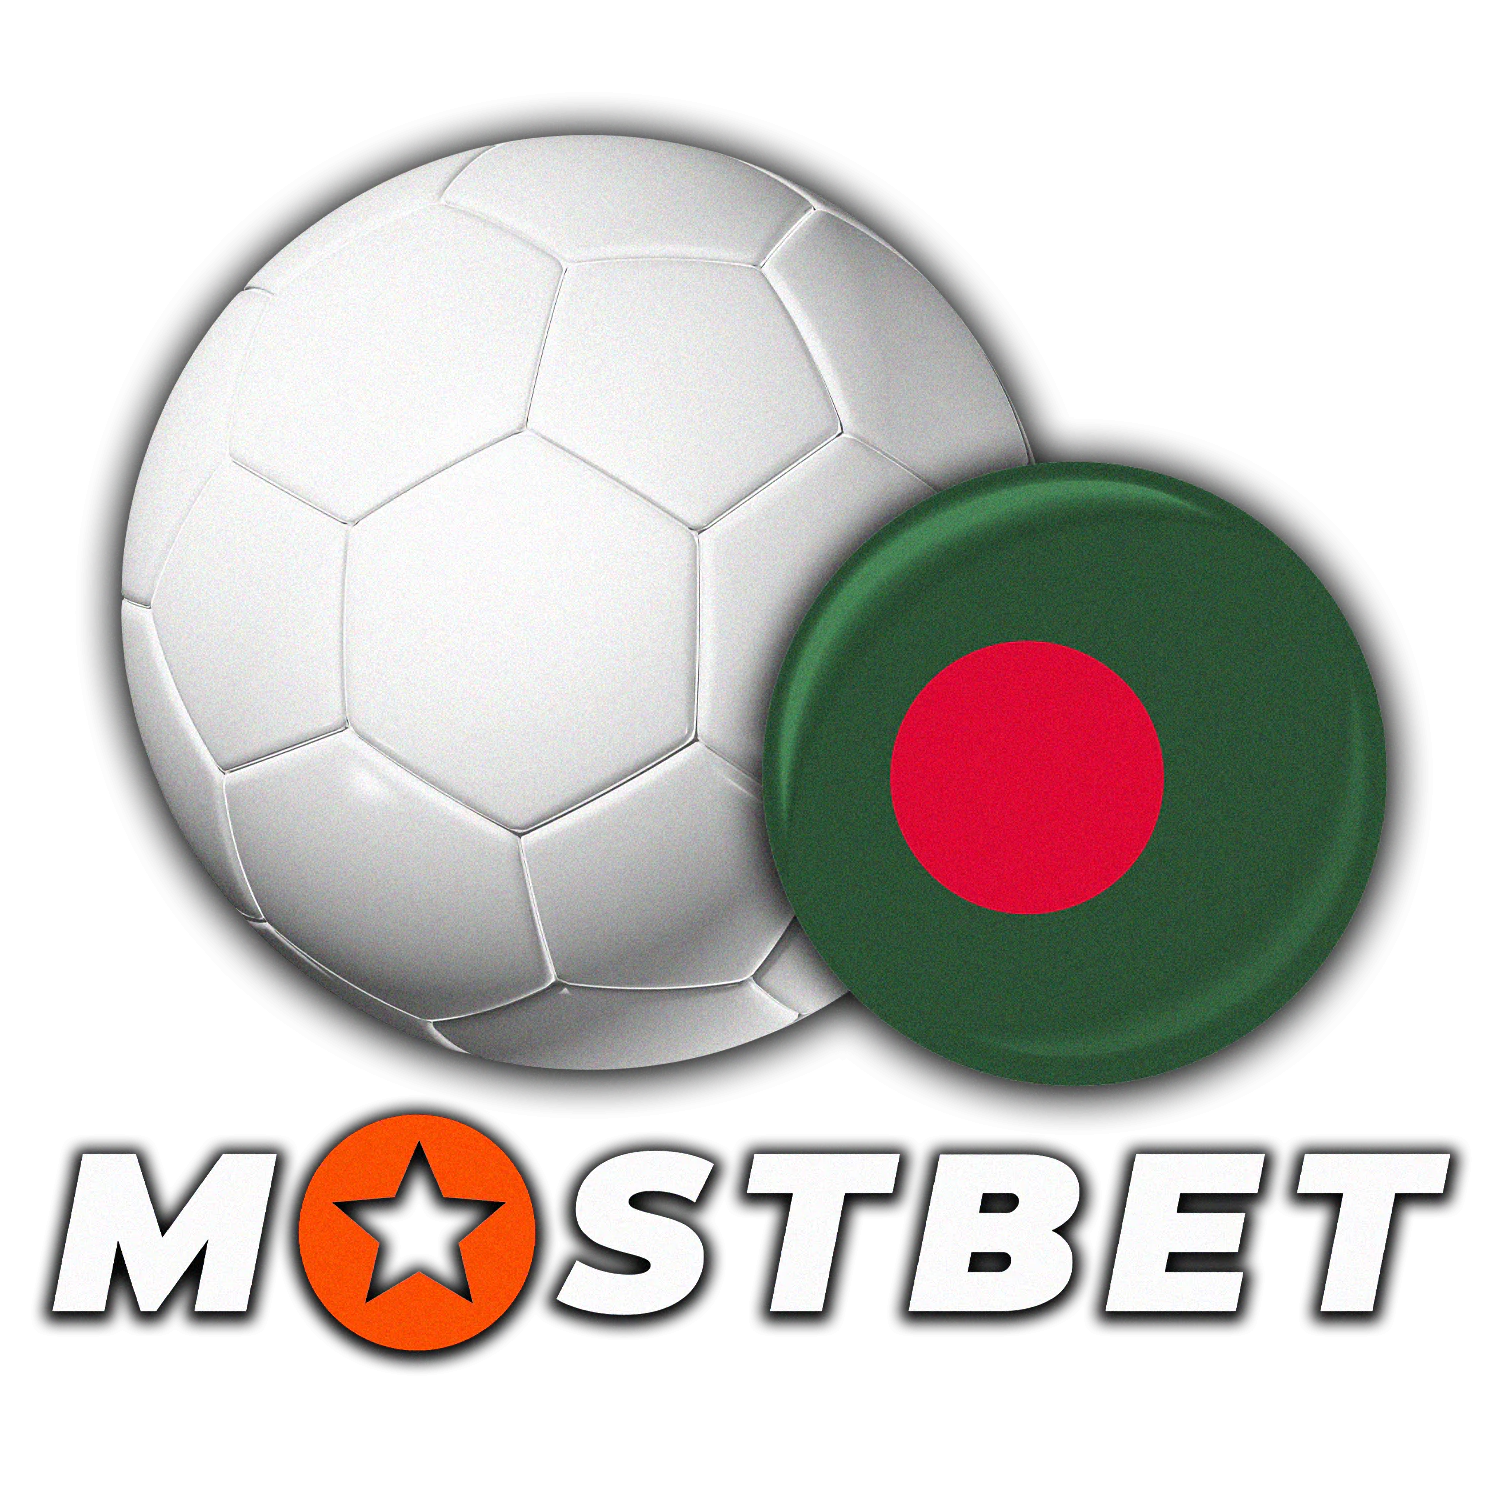 Football betting at Mostbet: online and live bets on local and other tournaments.